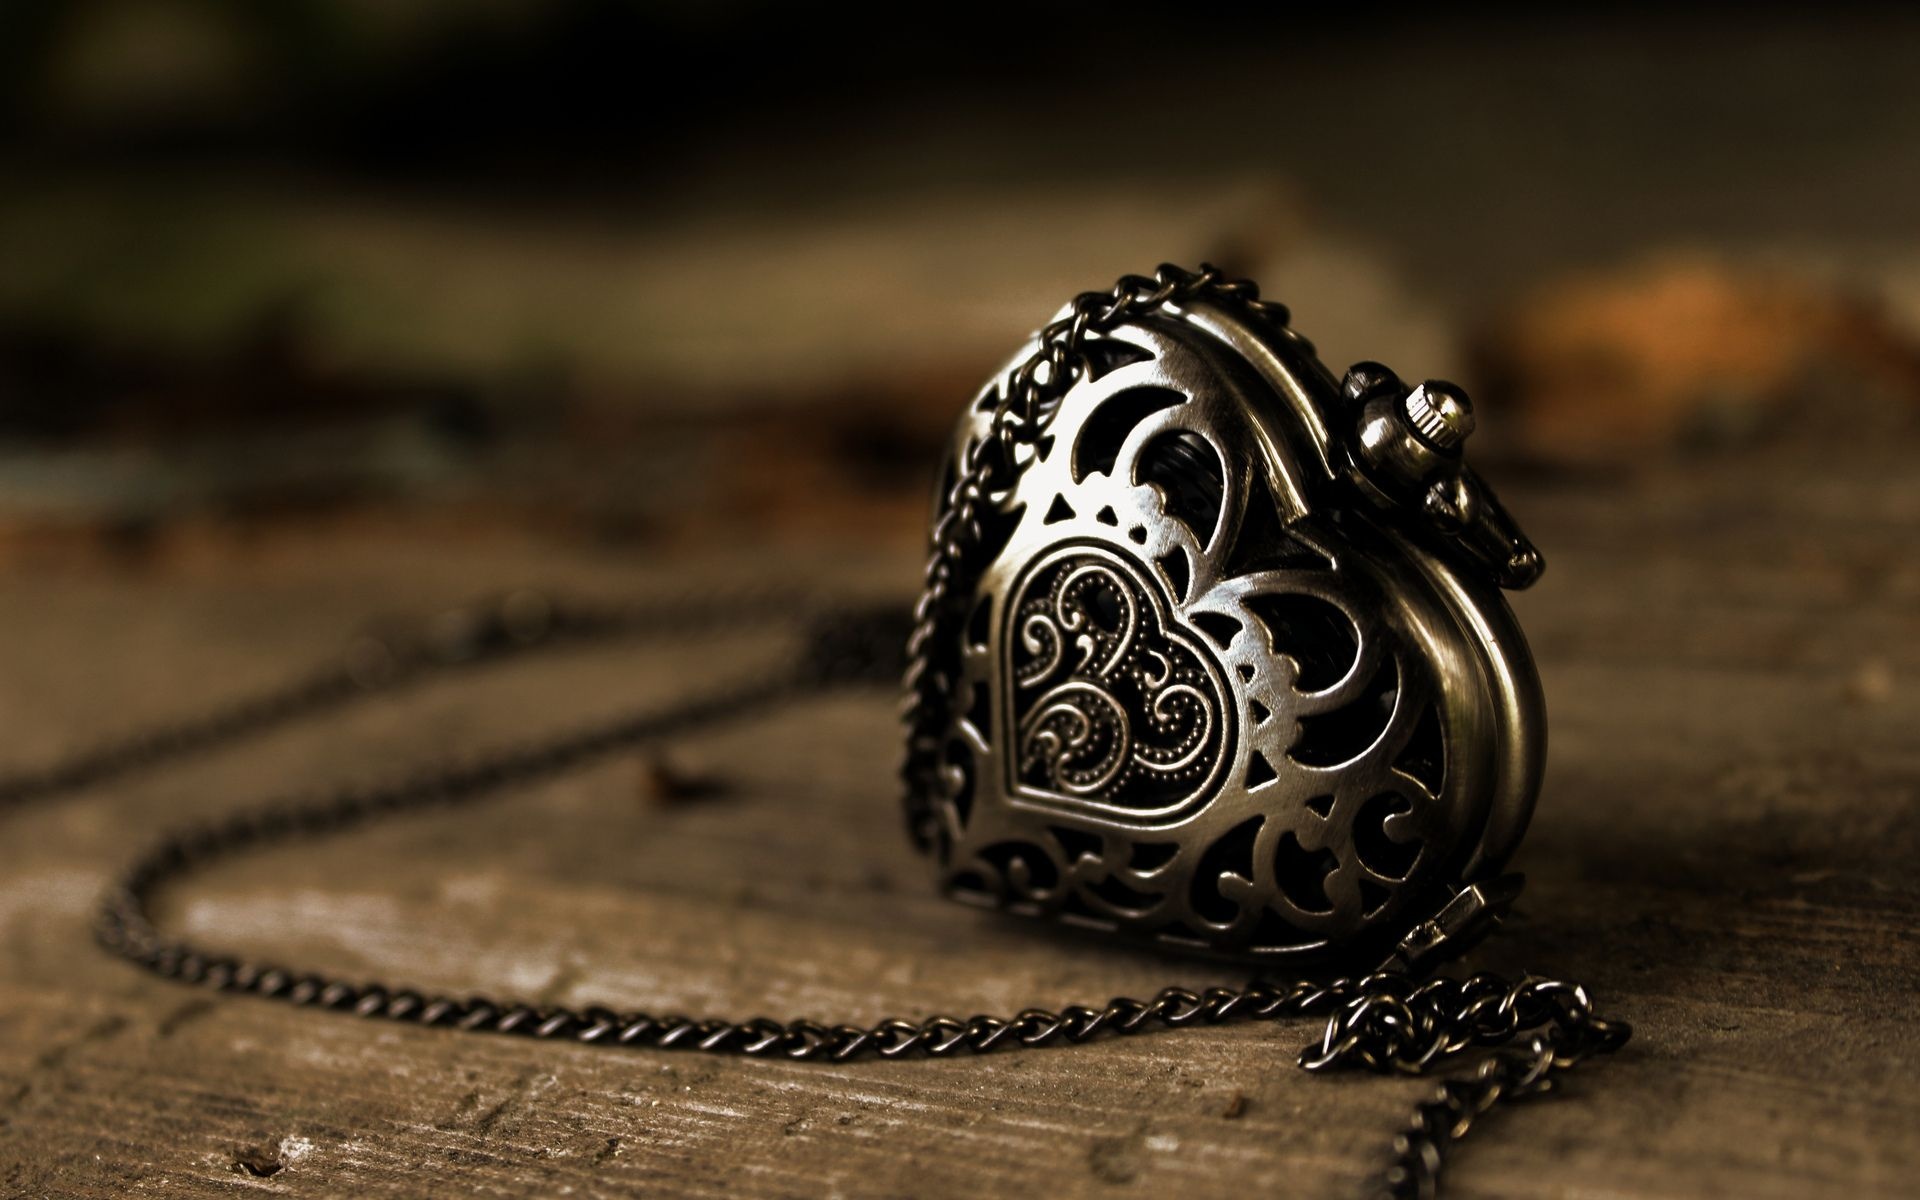 Necklace Wallpapers - Top Free Necklace Backgrounds 1920x1200